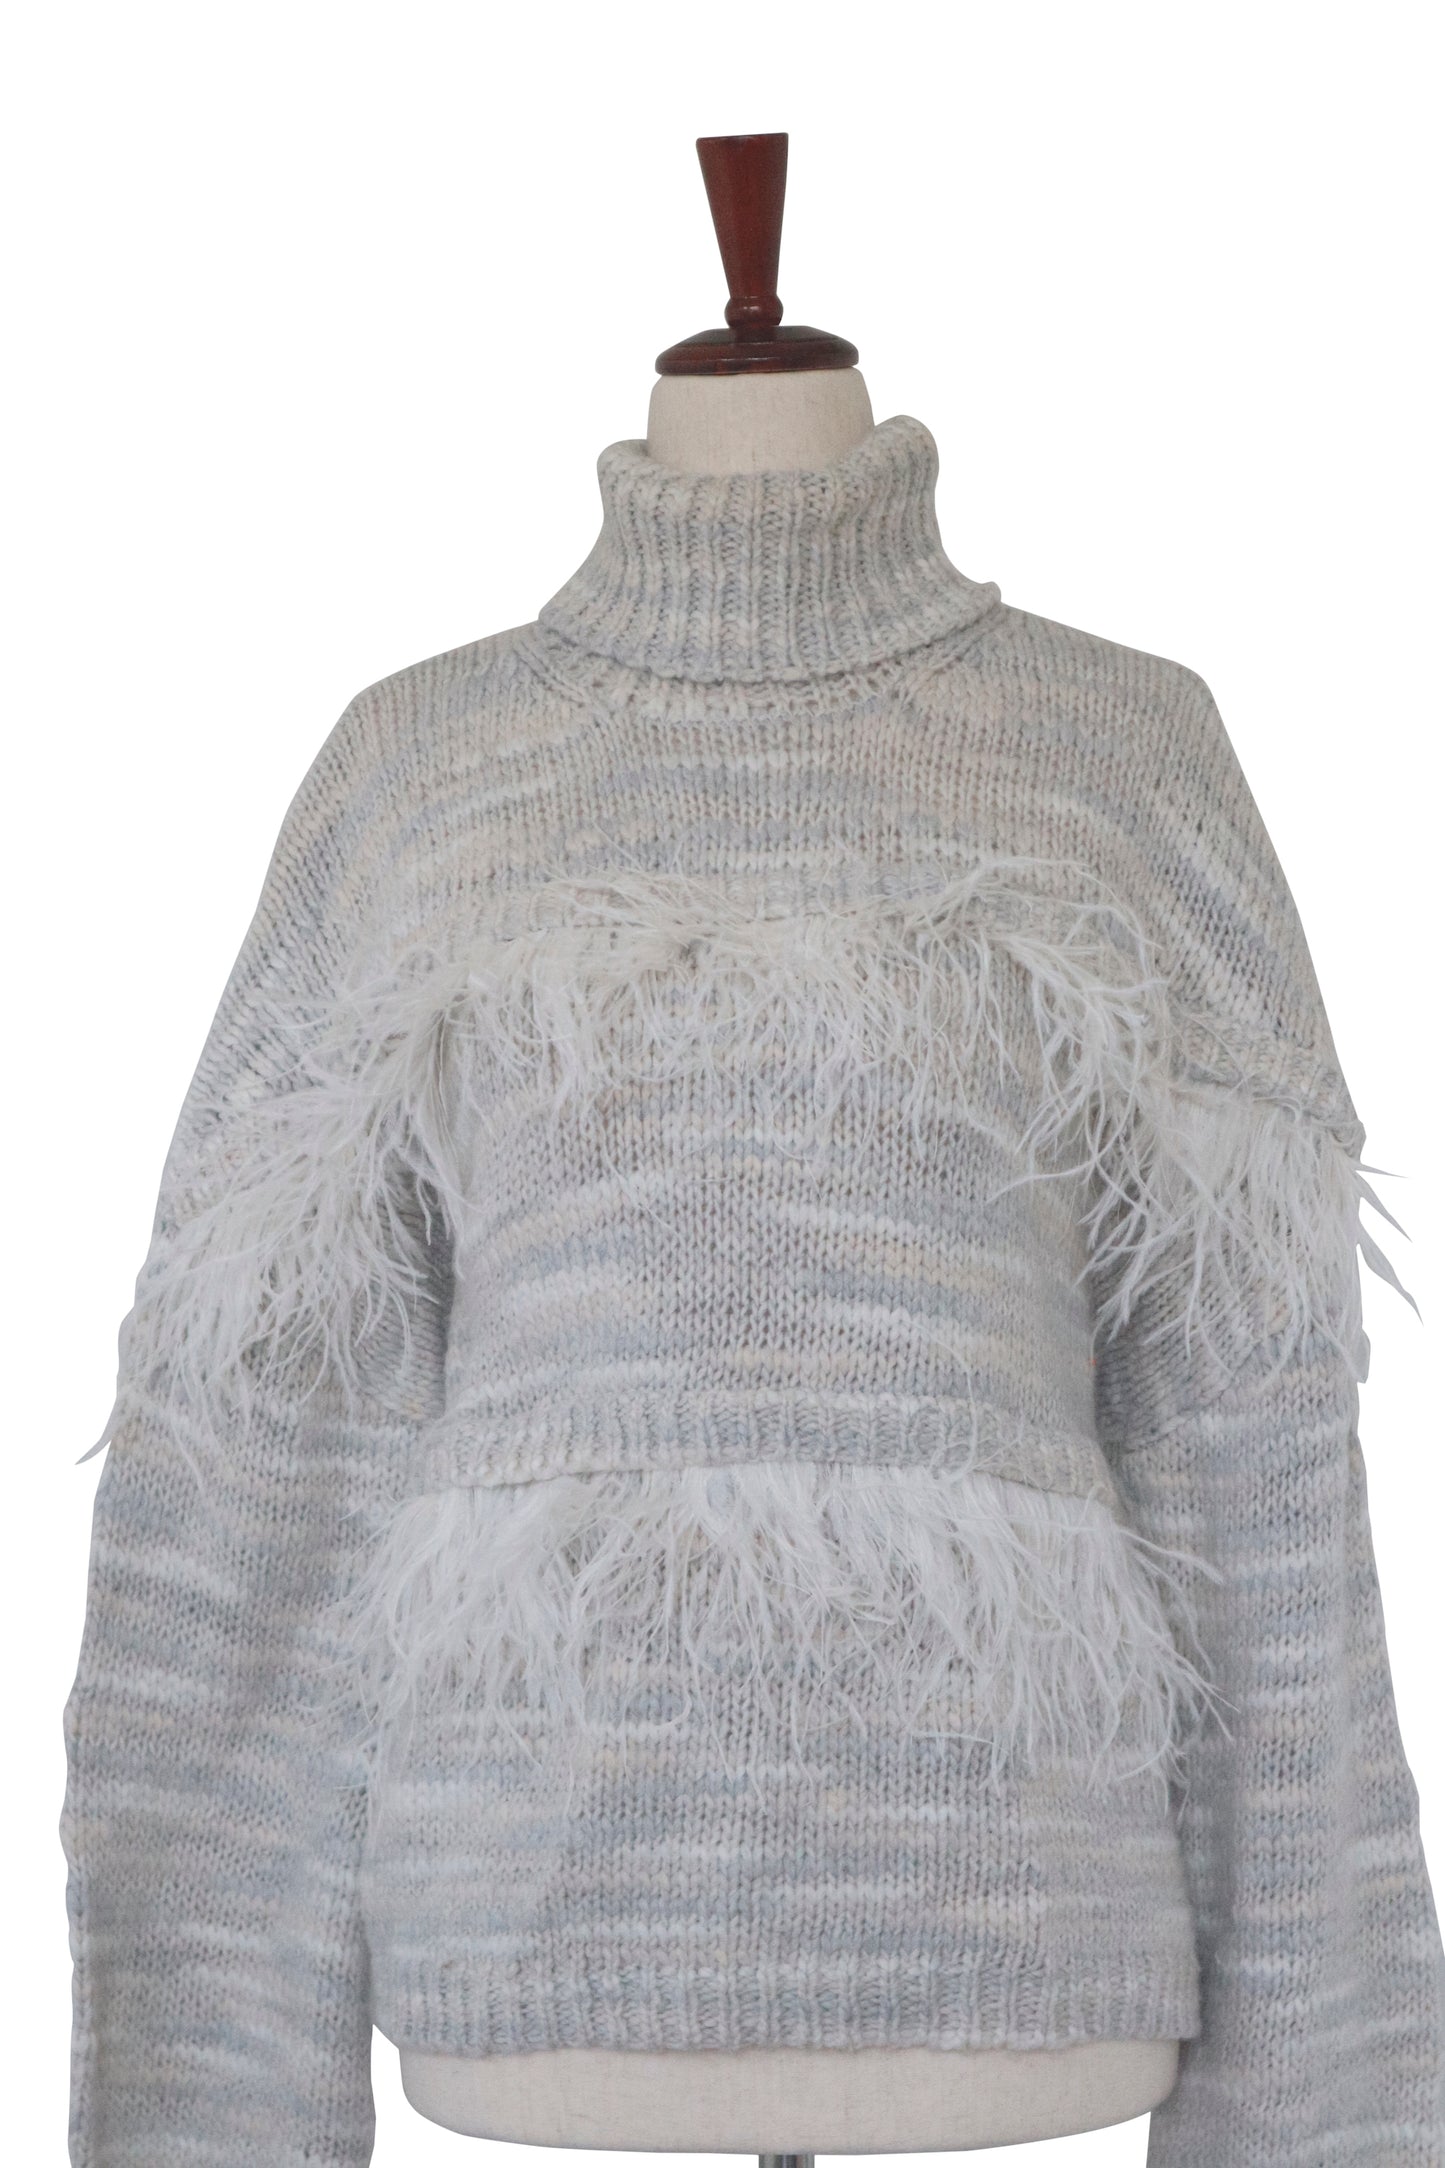 CINQ A SEPT - Feather Sweater - Size M